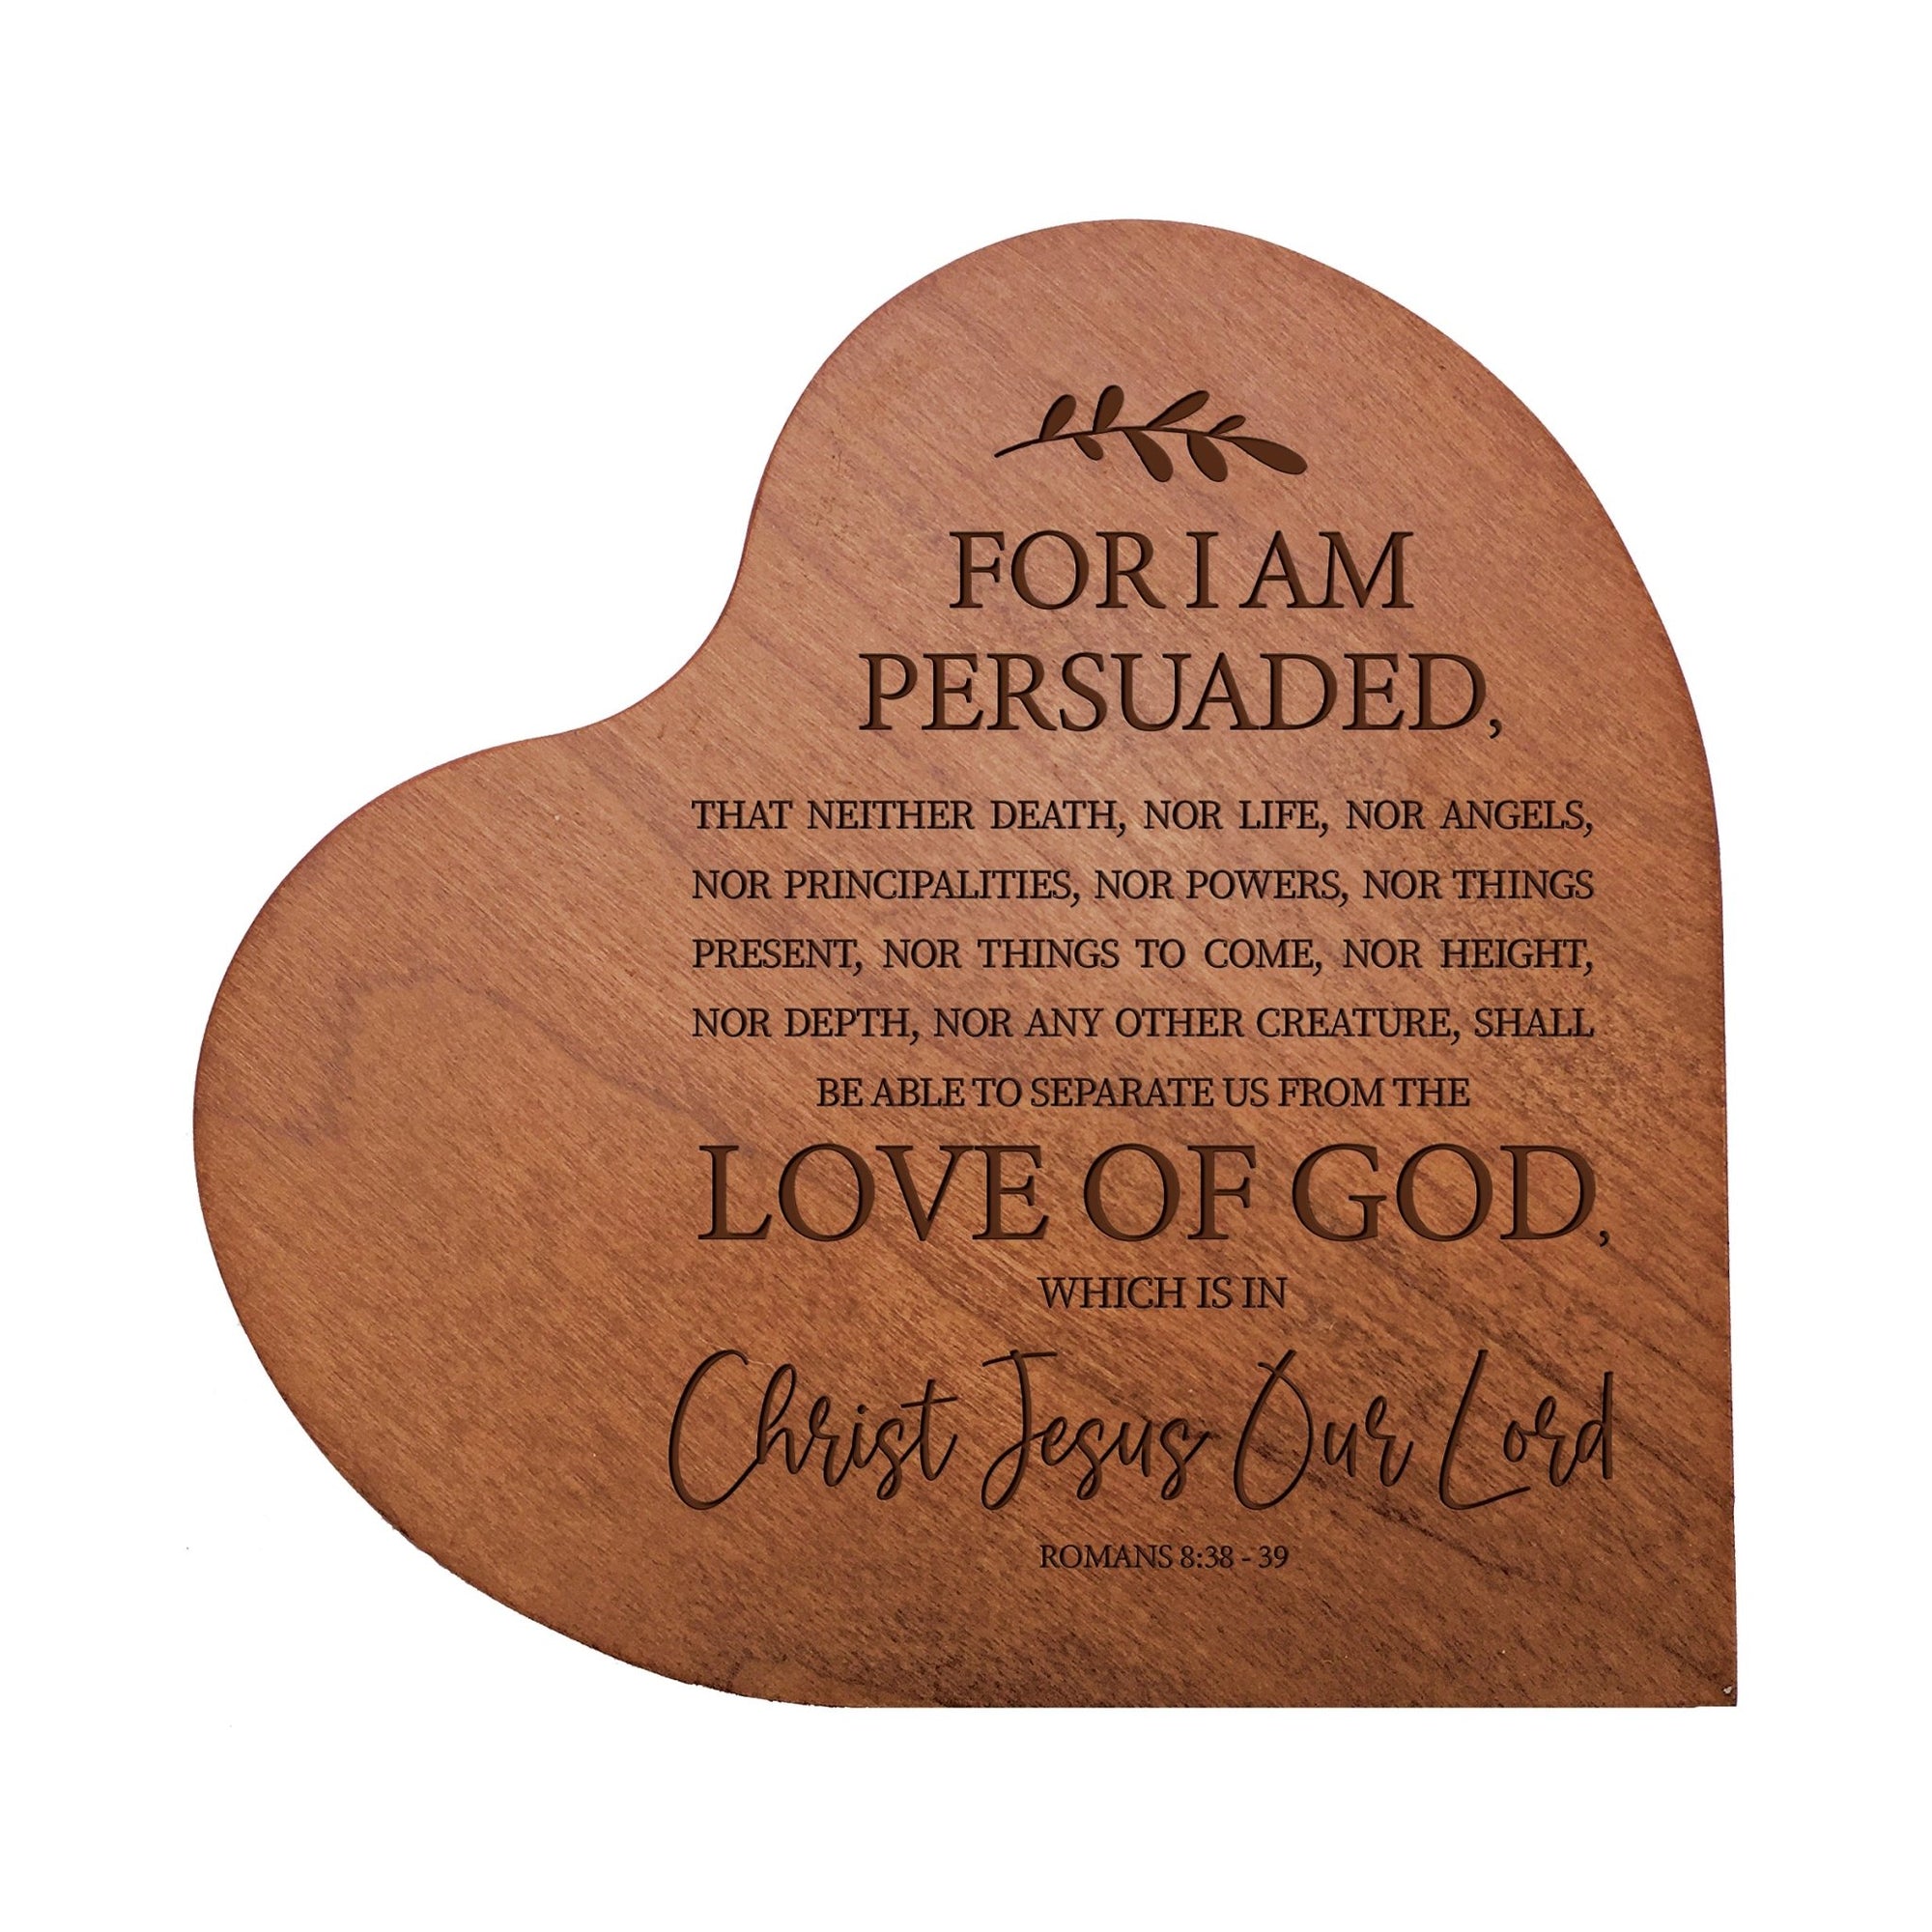 Engraved Wooden Inspirational Heart Block 5” x 5.25” x 0.75” - For I Am Persuaded - LifeSong Milestones